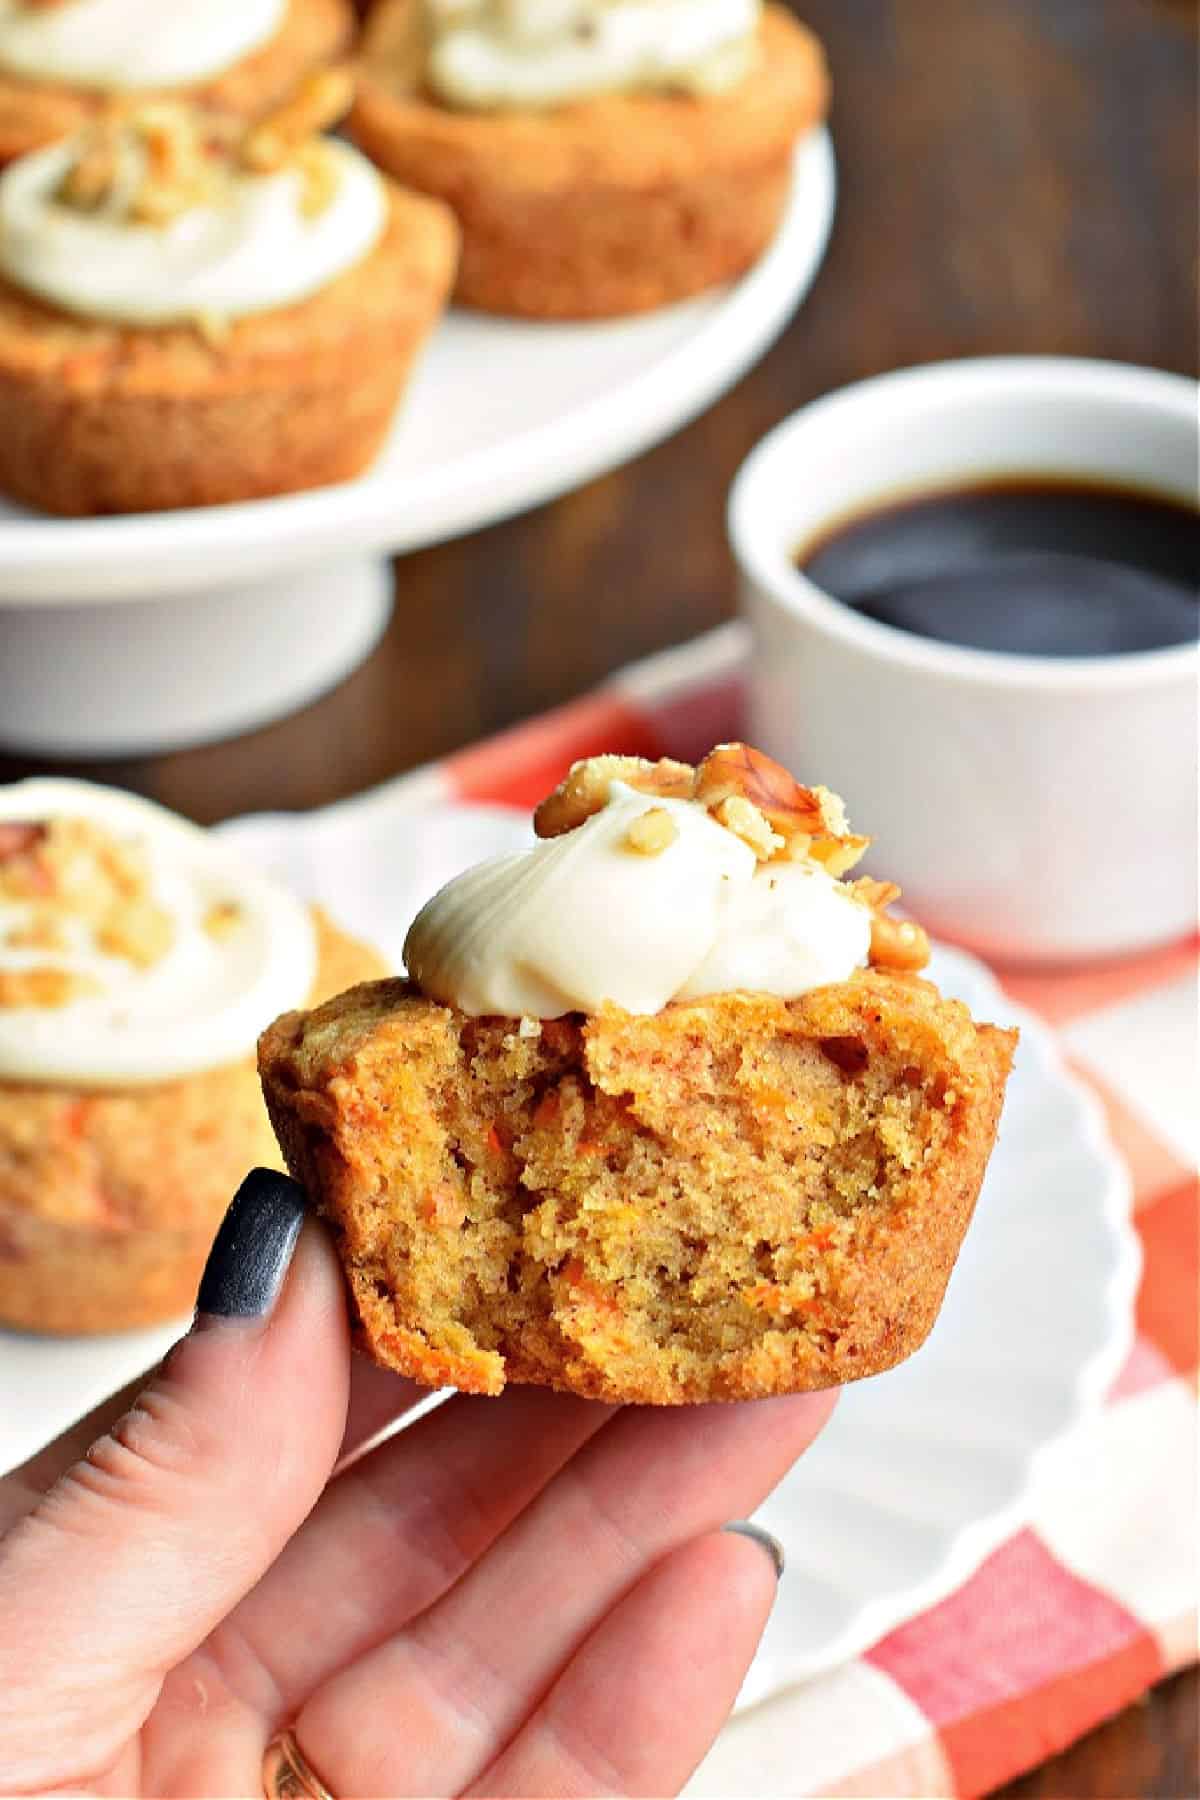 Carrot cake muffin with a bite taken out.